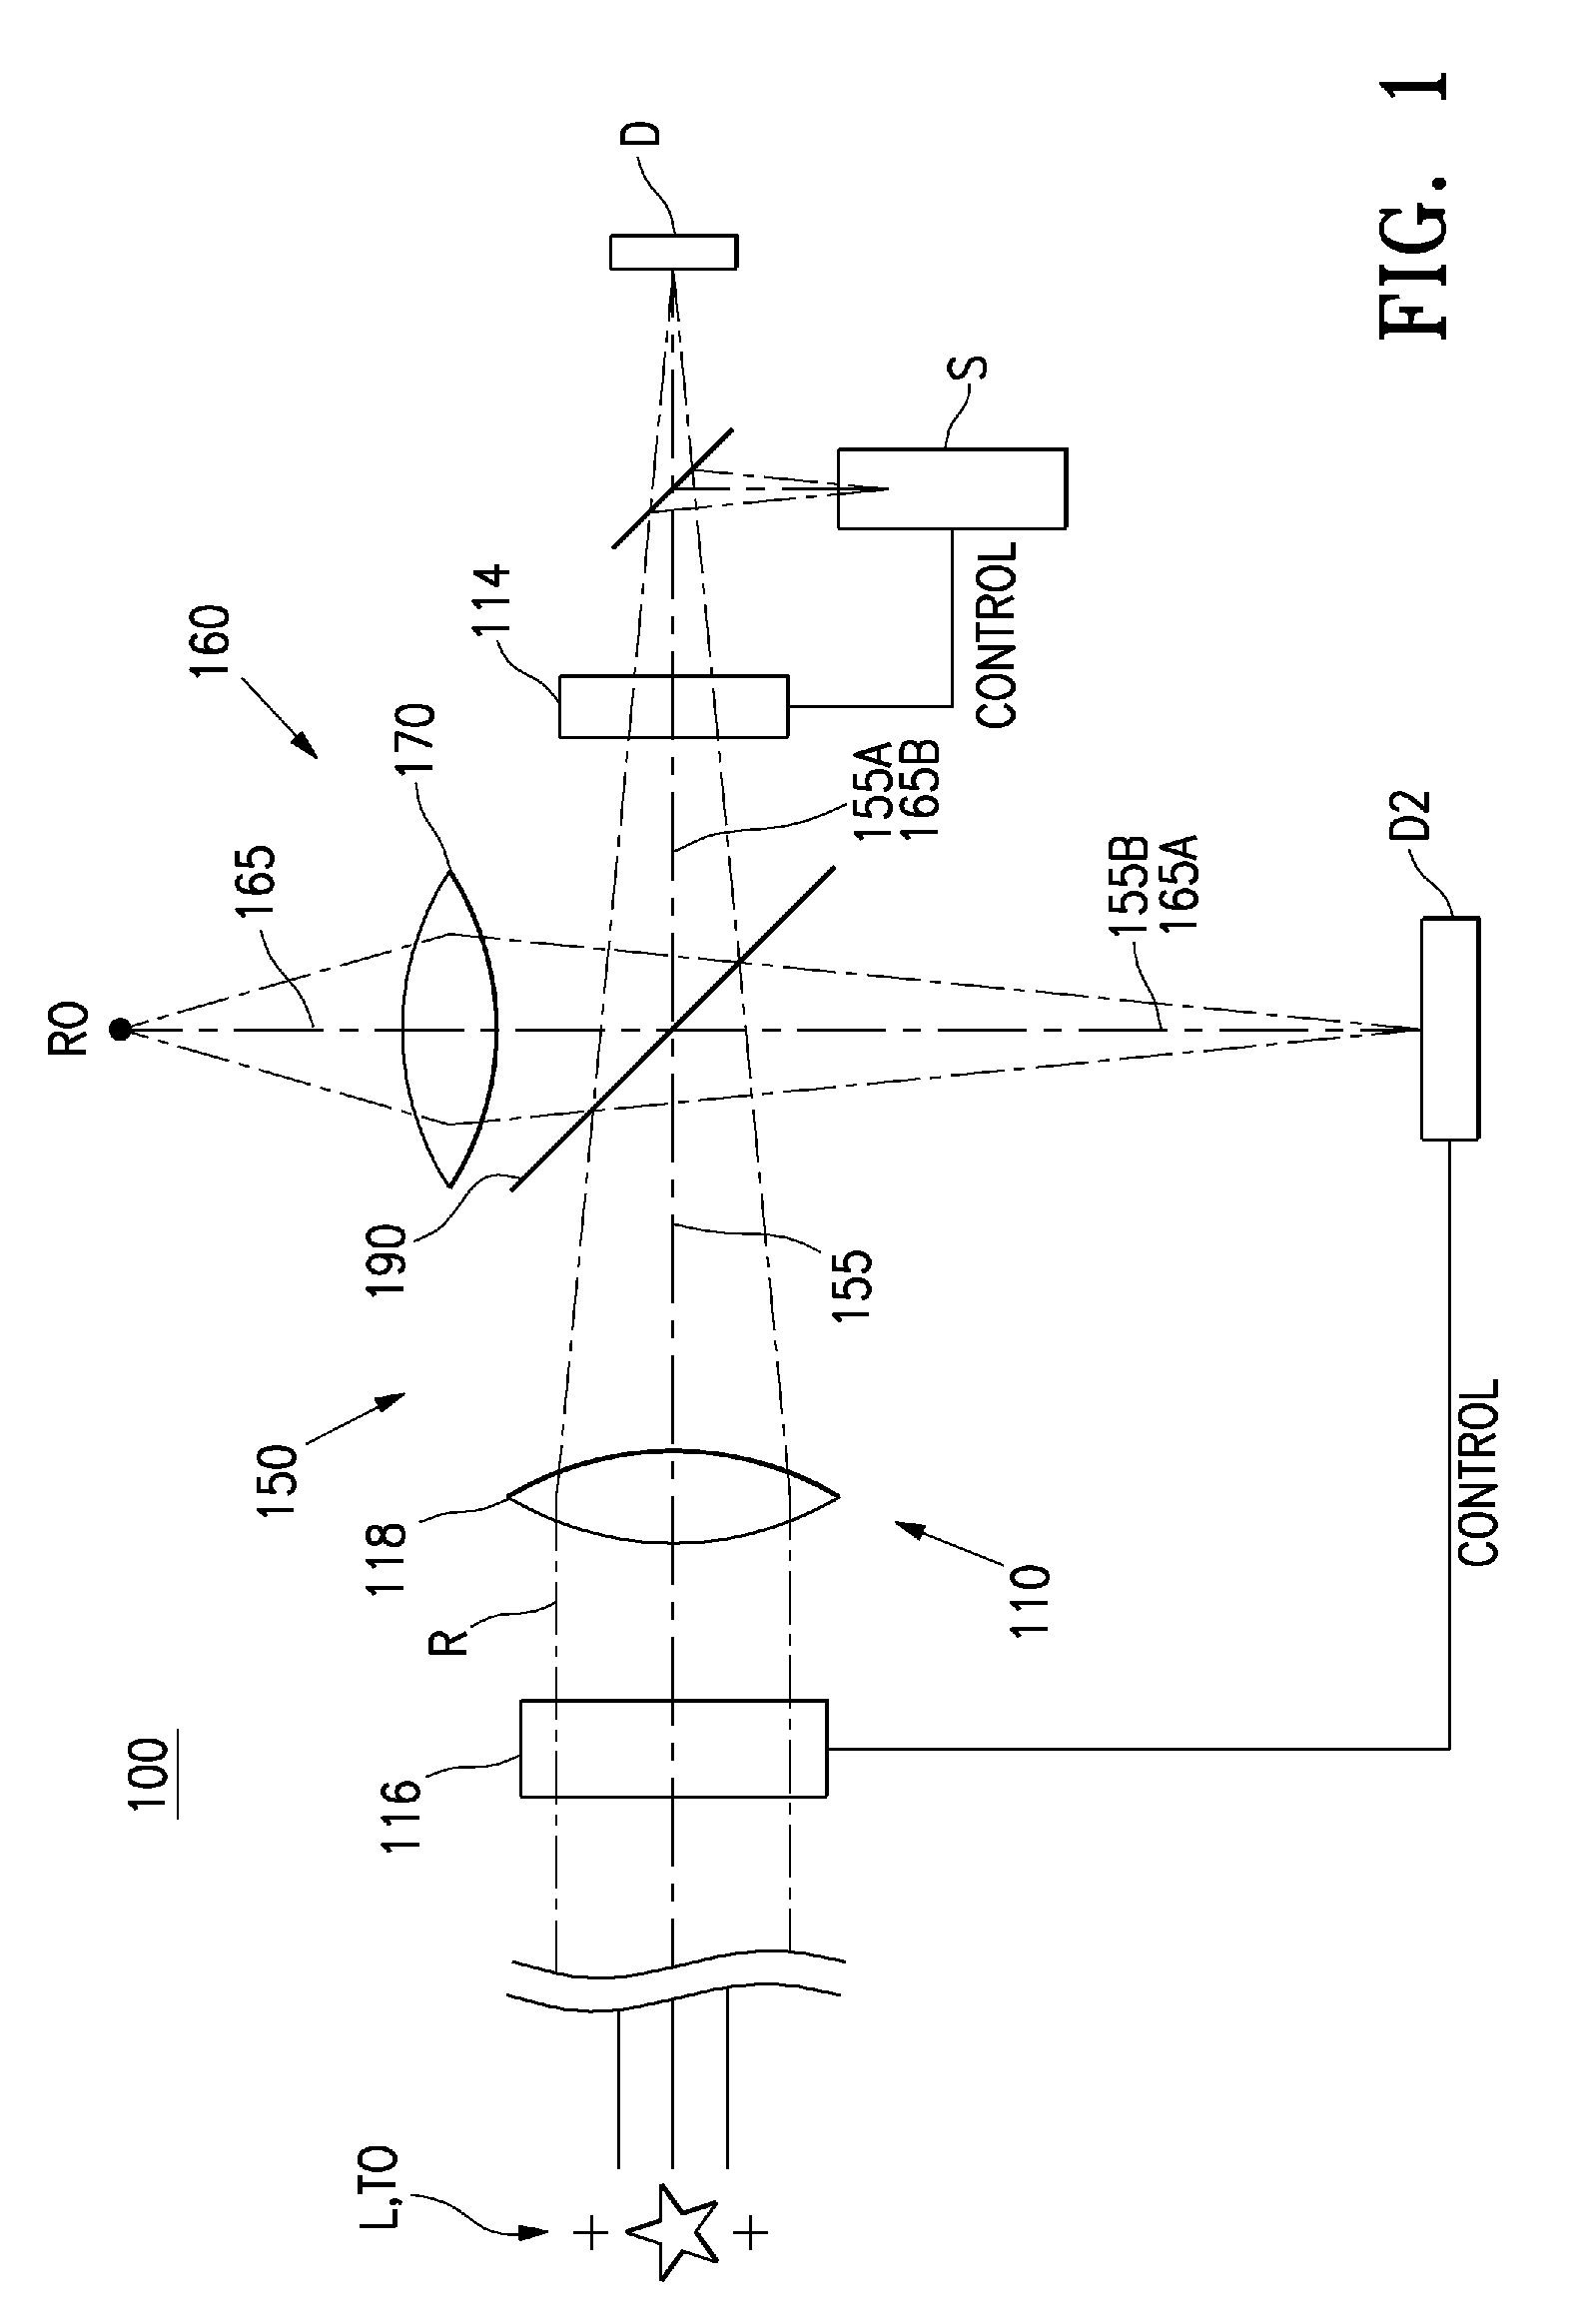 Adaptive optics imaging system with object acquisition capability